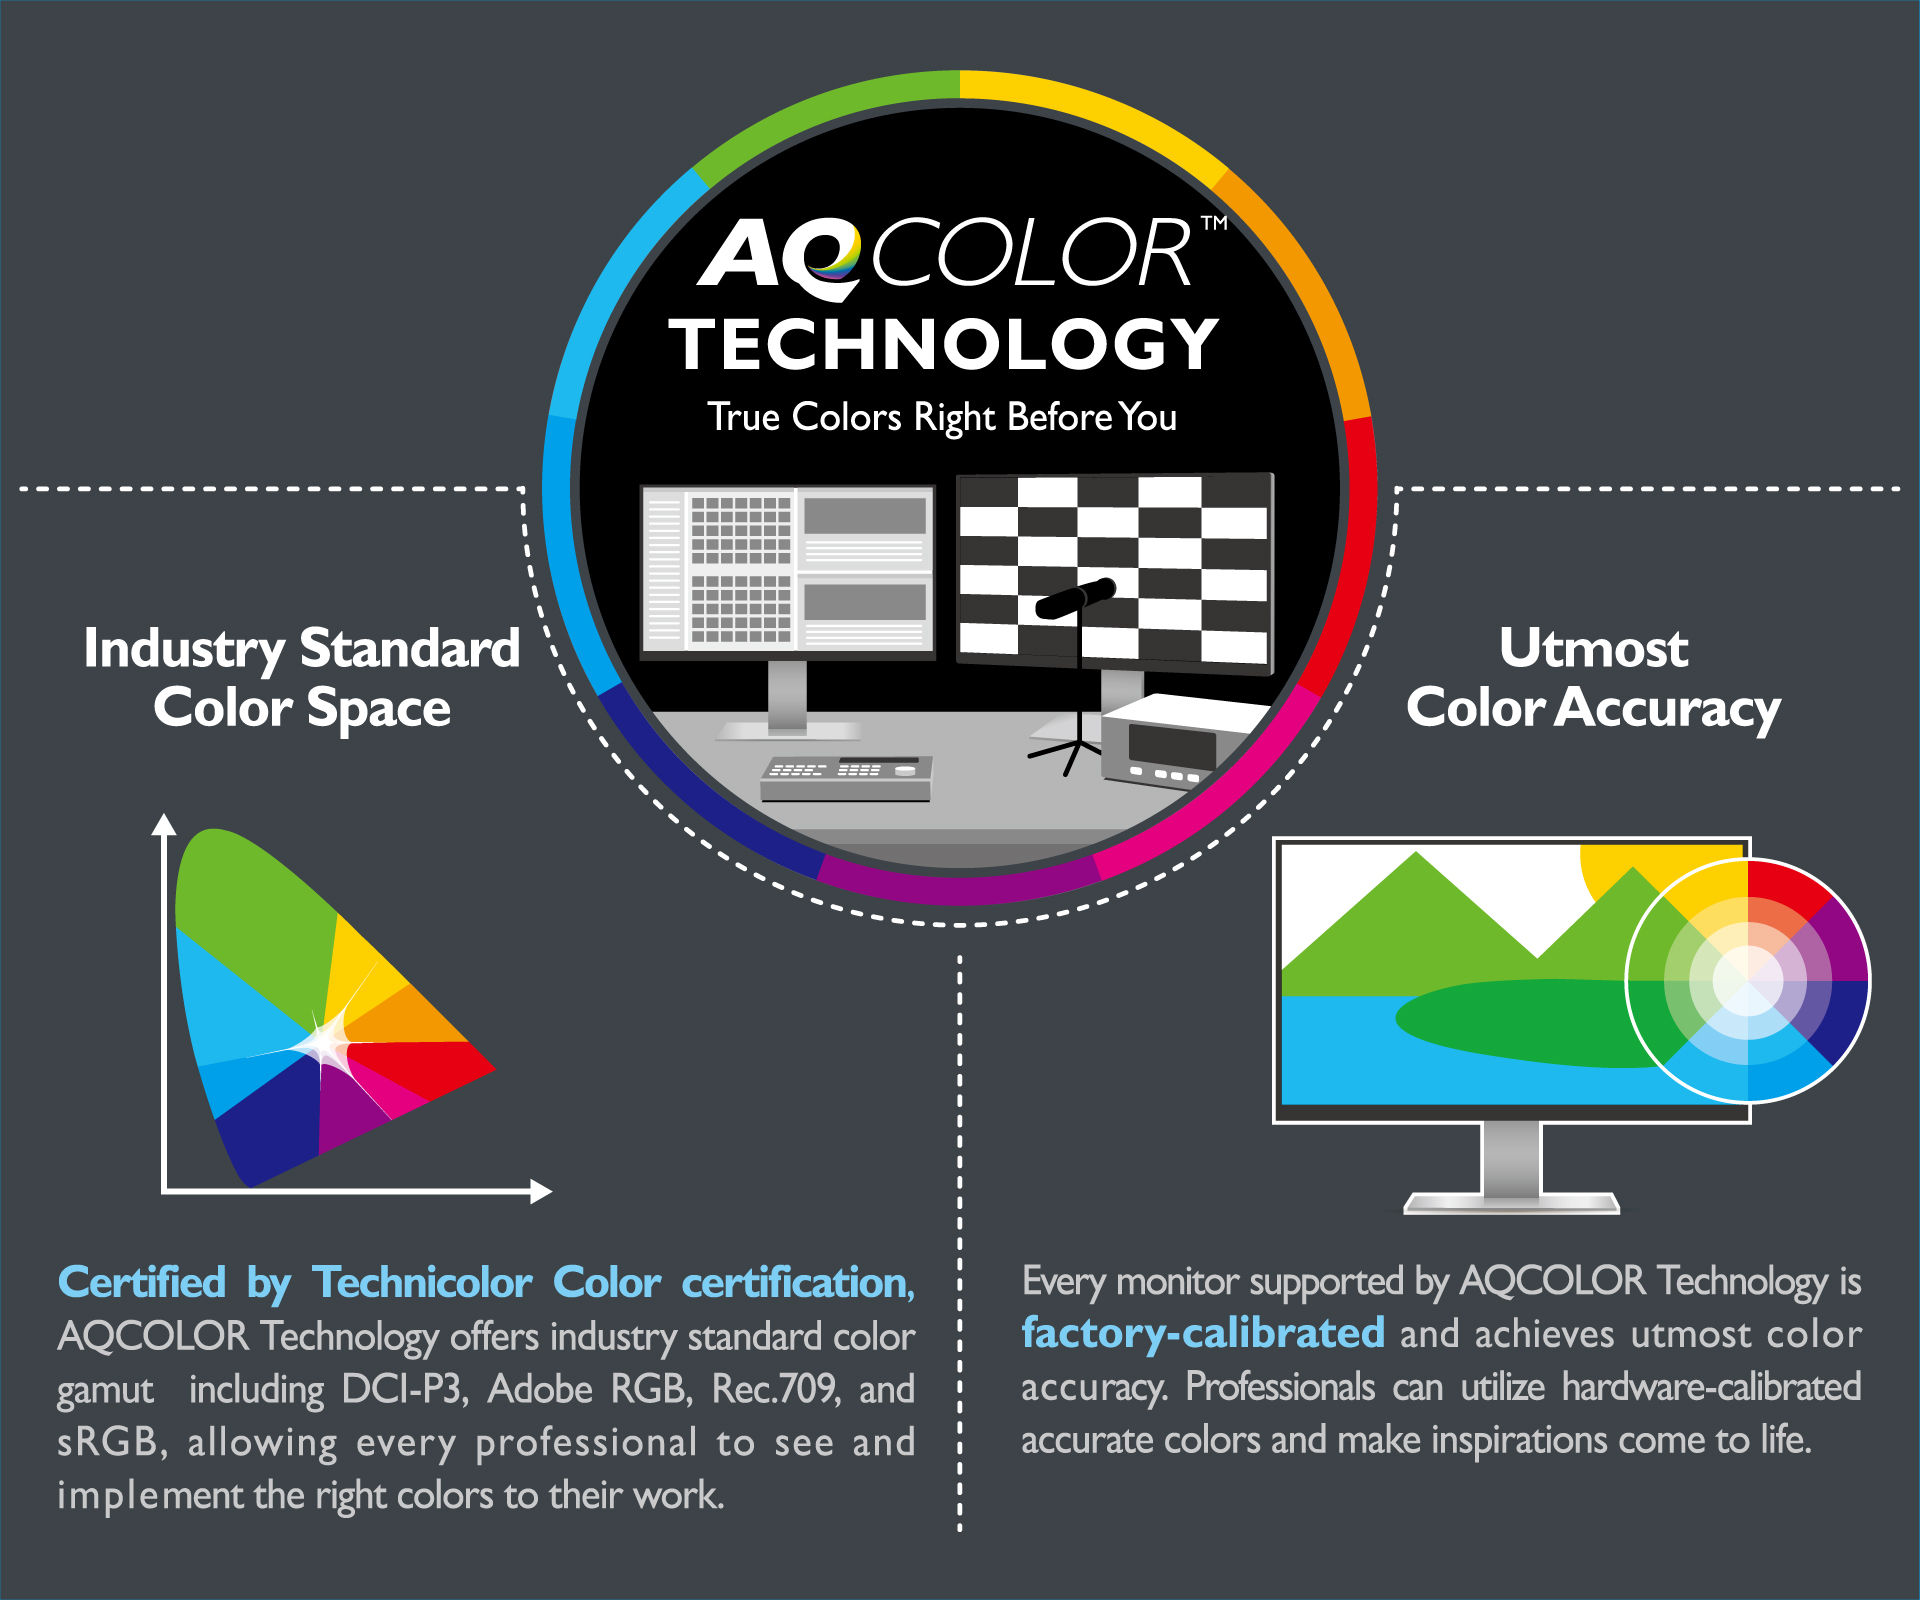 AQCOLOR technology offers industry standard color gamut including DCI-P3, Adobe RGB, Rec.709, and sRGB, allowing every professional to see and implement the right colors to their work ; also every monitor supported by AQCOLOR technology is factory-calibrated and achieves utmost color accuracy.